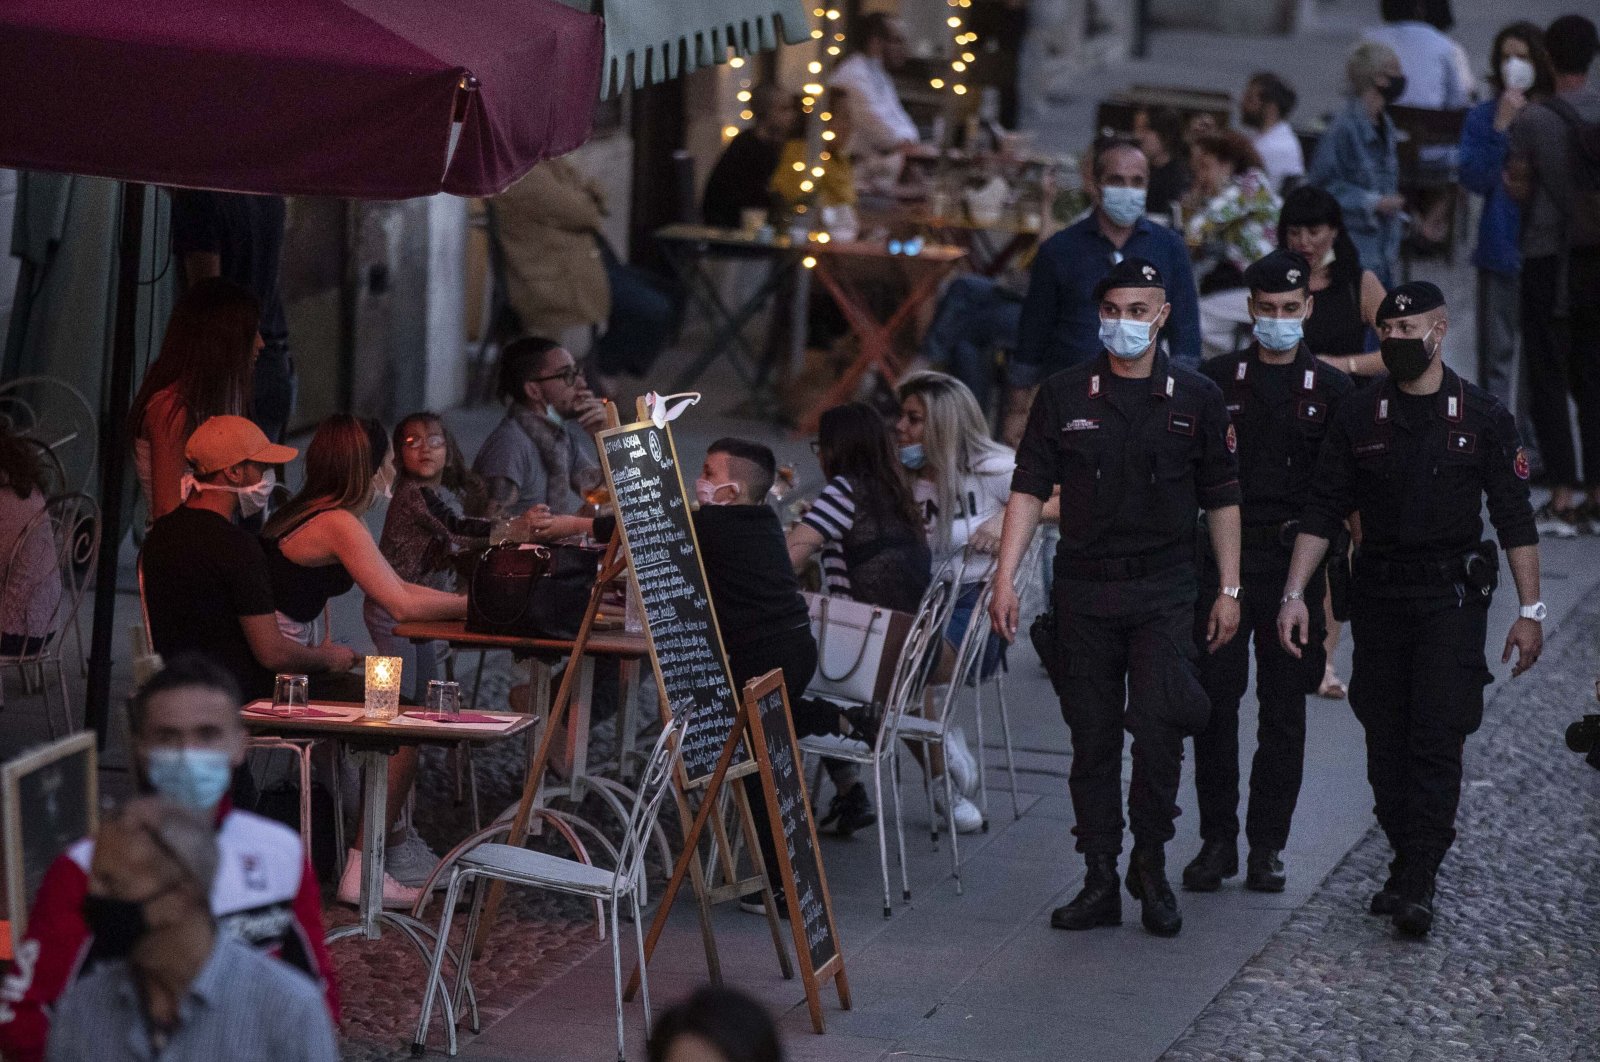 Carabinieri officers patrol the city trendy Navigli district in Milan, Italy, Tuesday, May 26, 2020. (AP Photo)